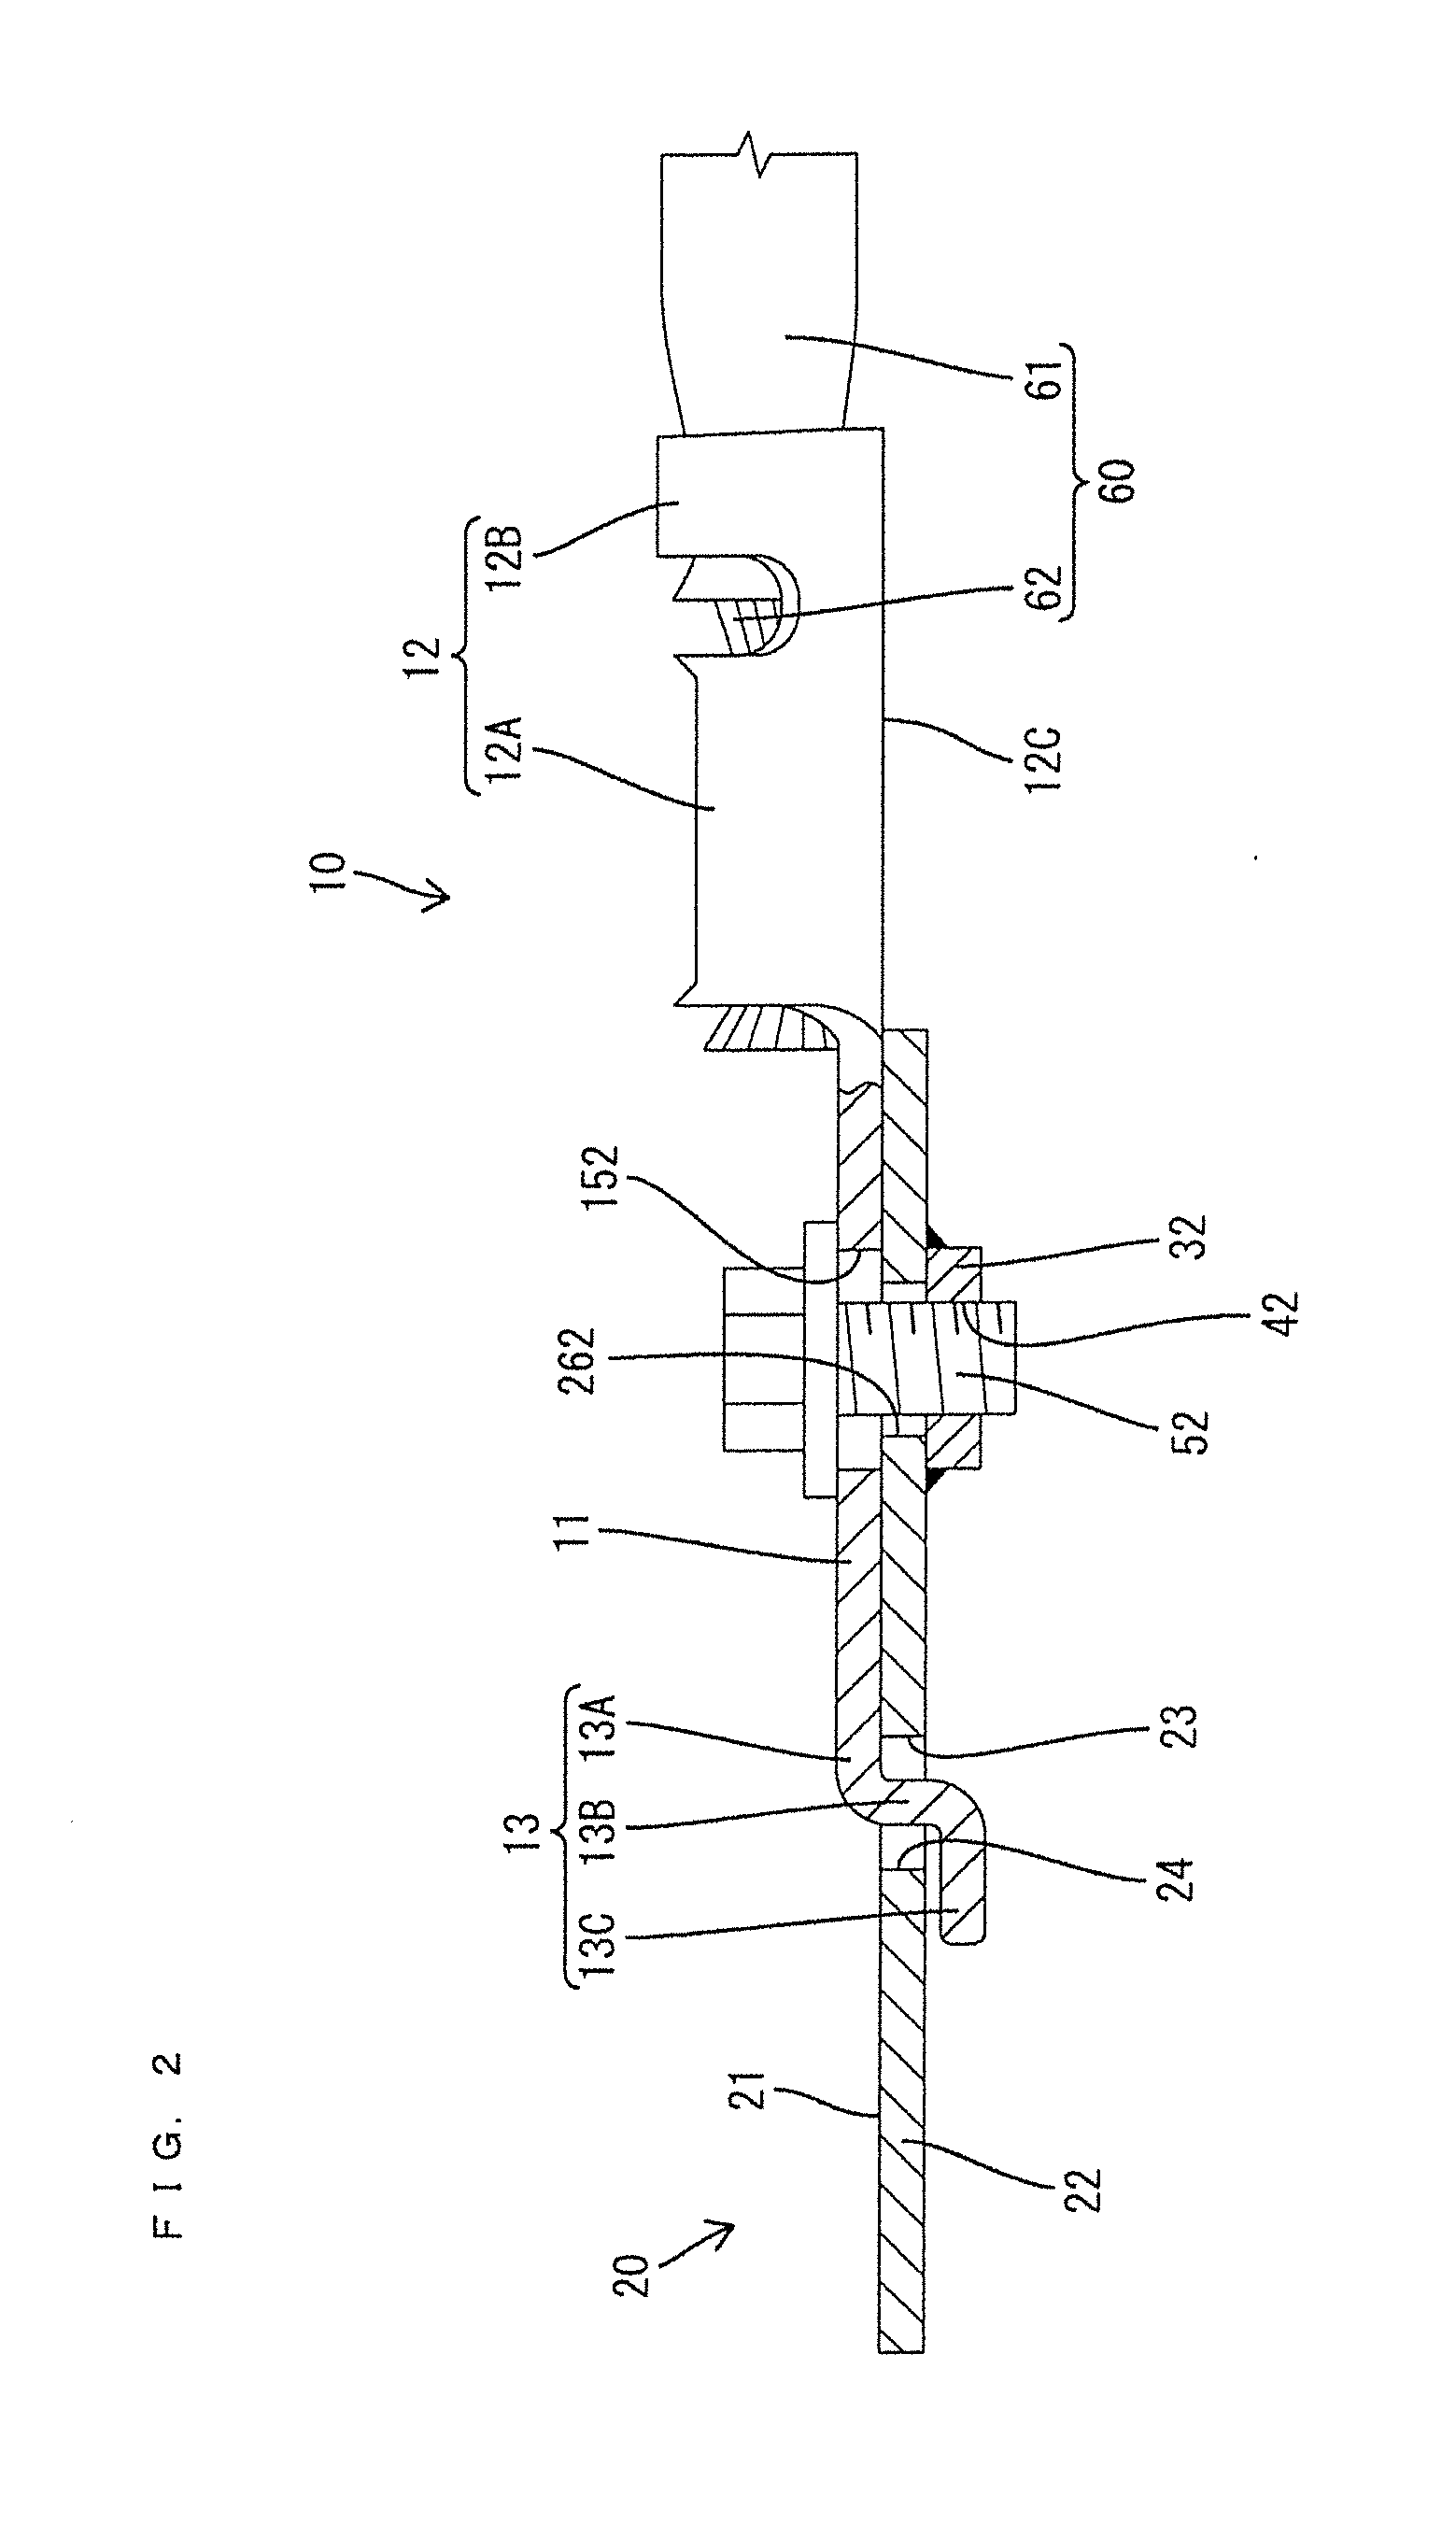 Connection structure for ground terminal fitting